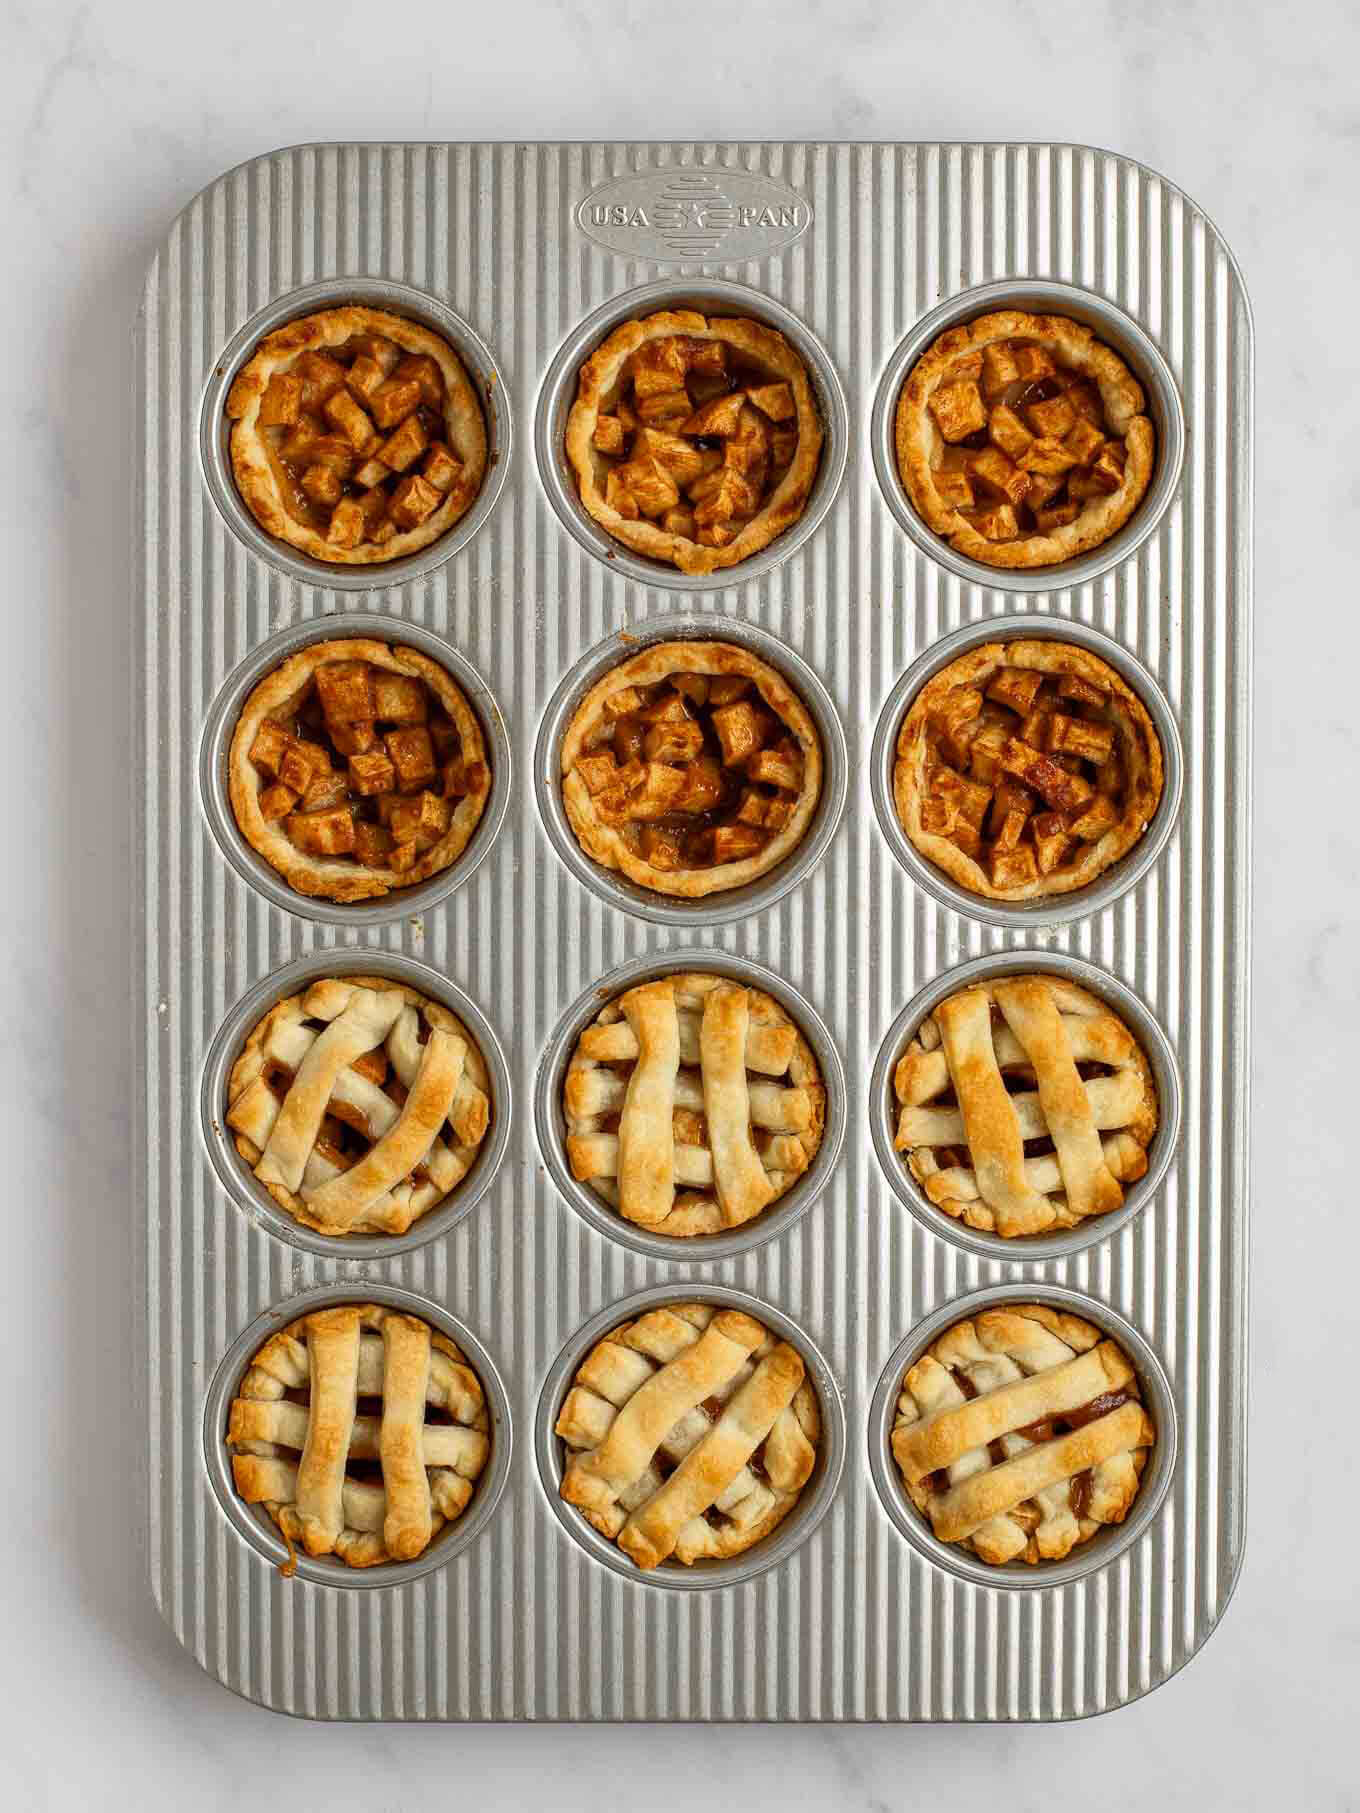 An overhead view of the baked mini apple pies in a muffin pan. Half of the mini pies have a lattice pie crust topping.